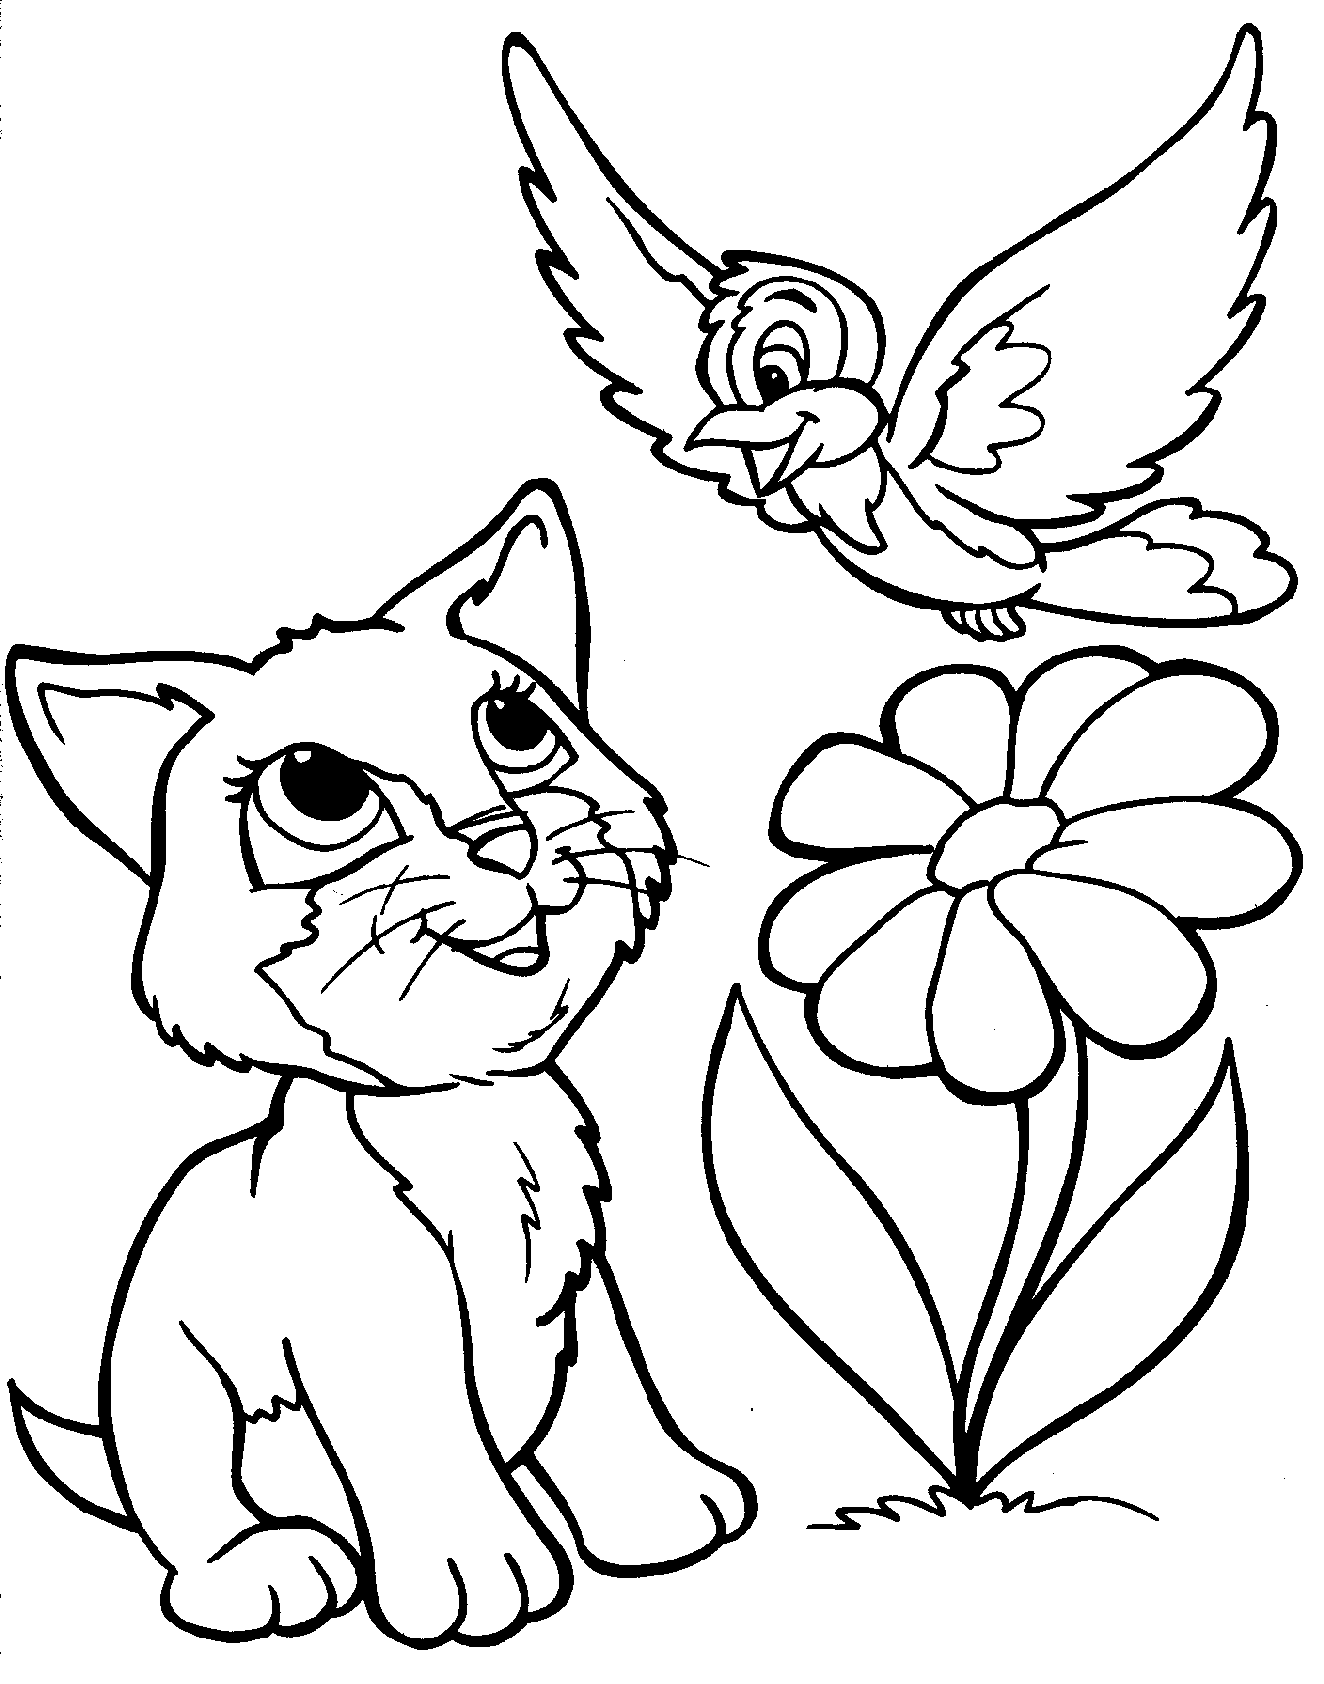 cat color page cat coloring pages only coloring pages page cat color 